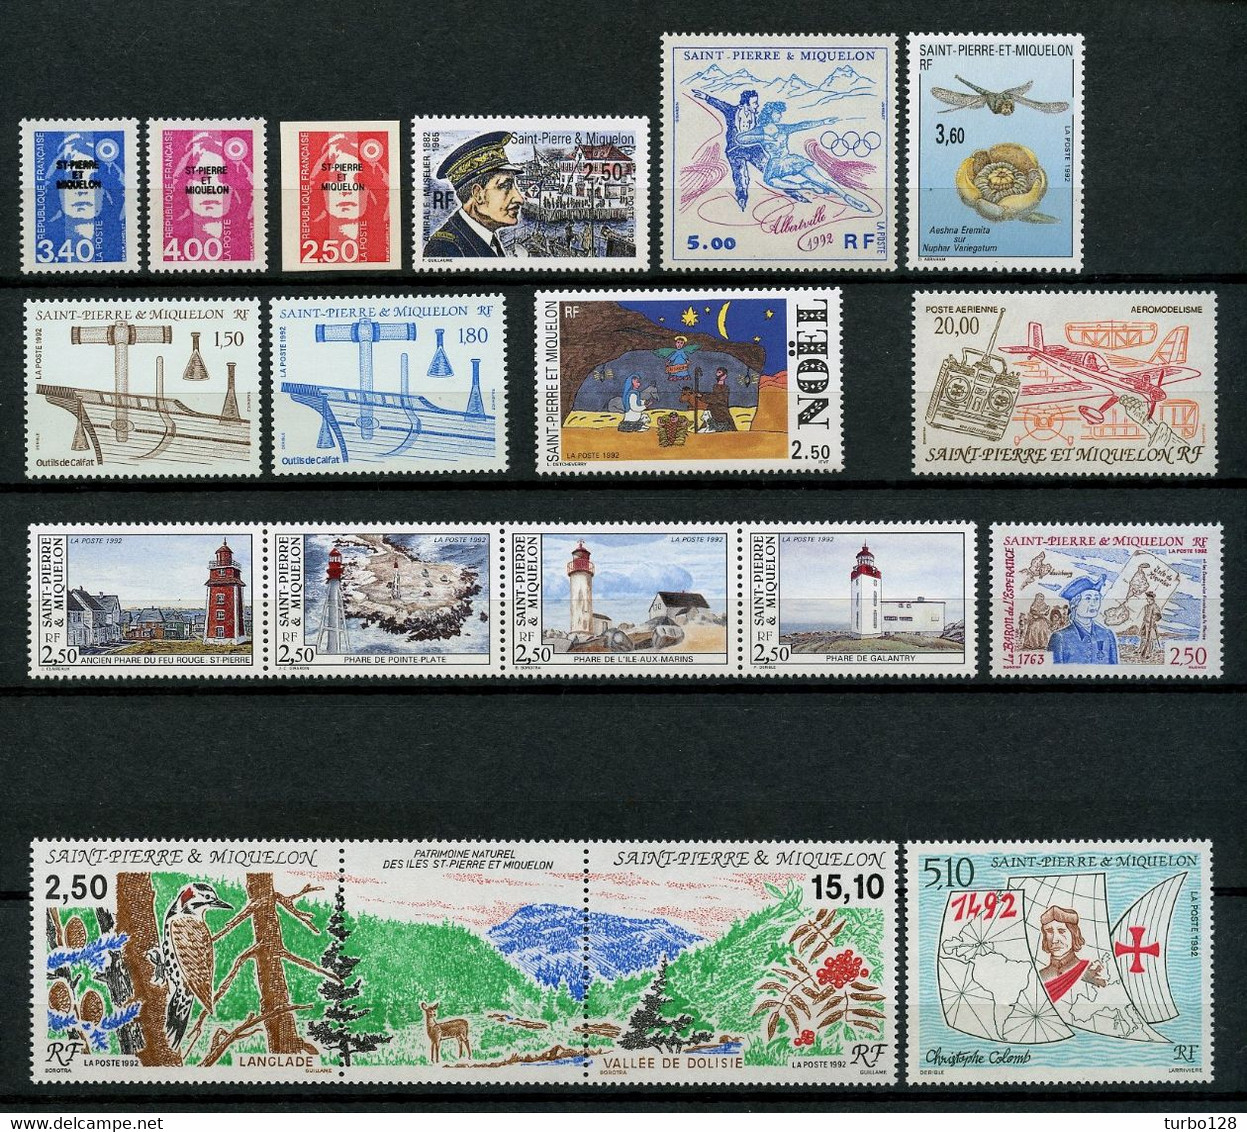 SPM Miquelon Année 1992 ** Complète N° 555/571 PA 71 Neufs MNH Luxe C 42,70 € Jahrgang Ano Completo Complet Year - Full Years